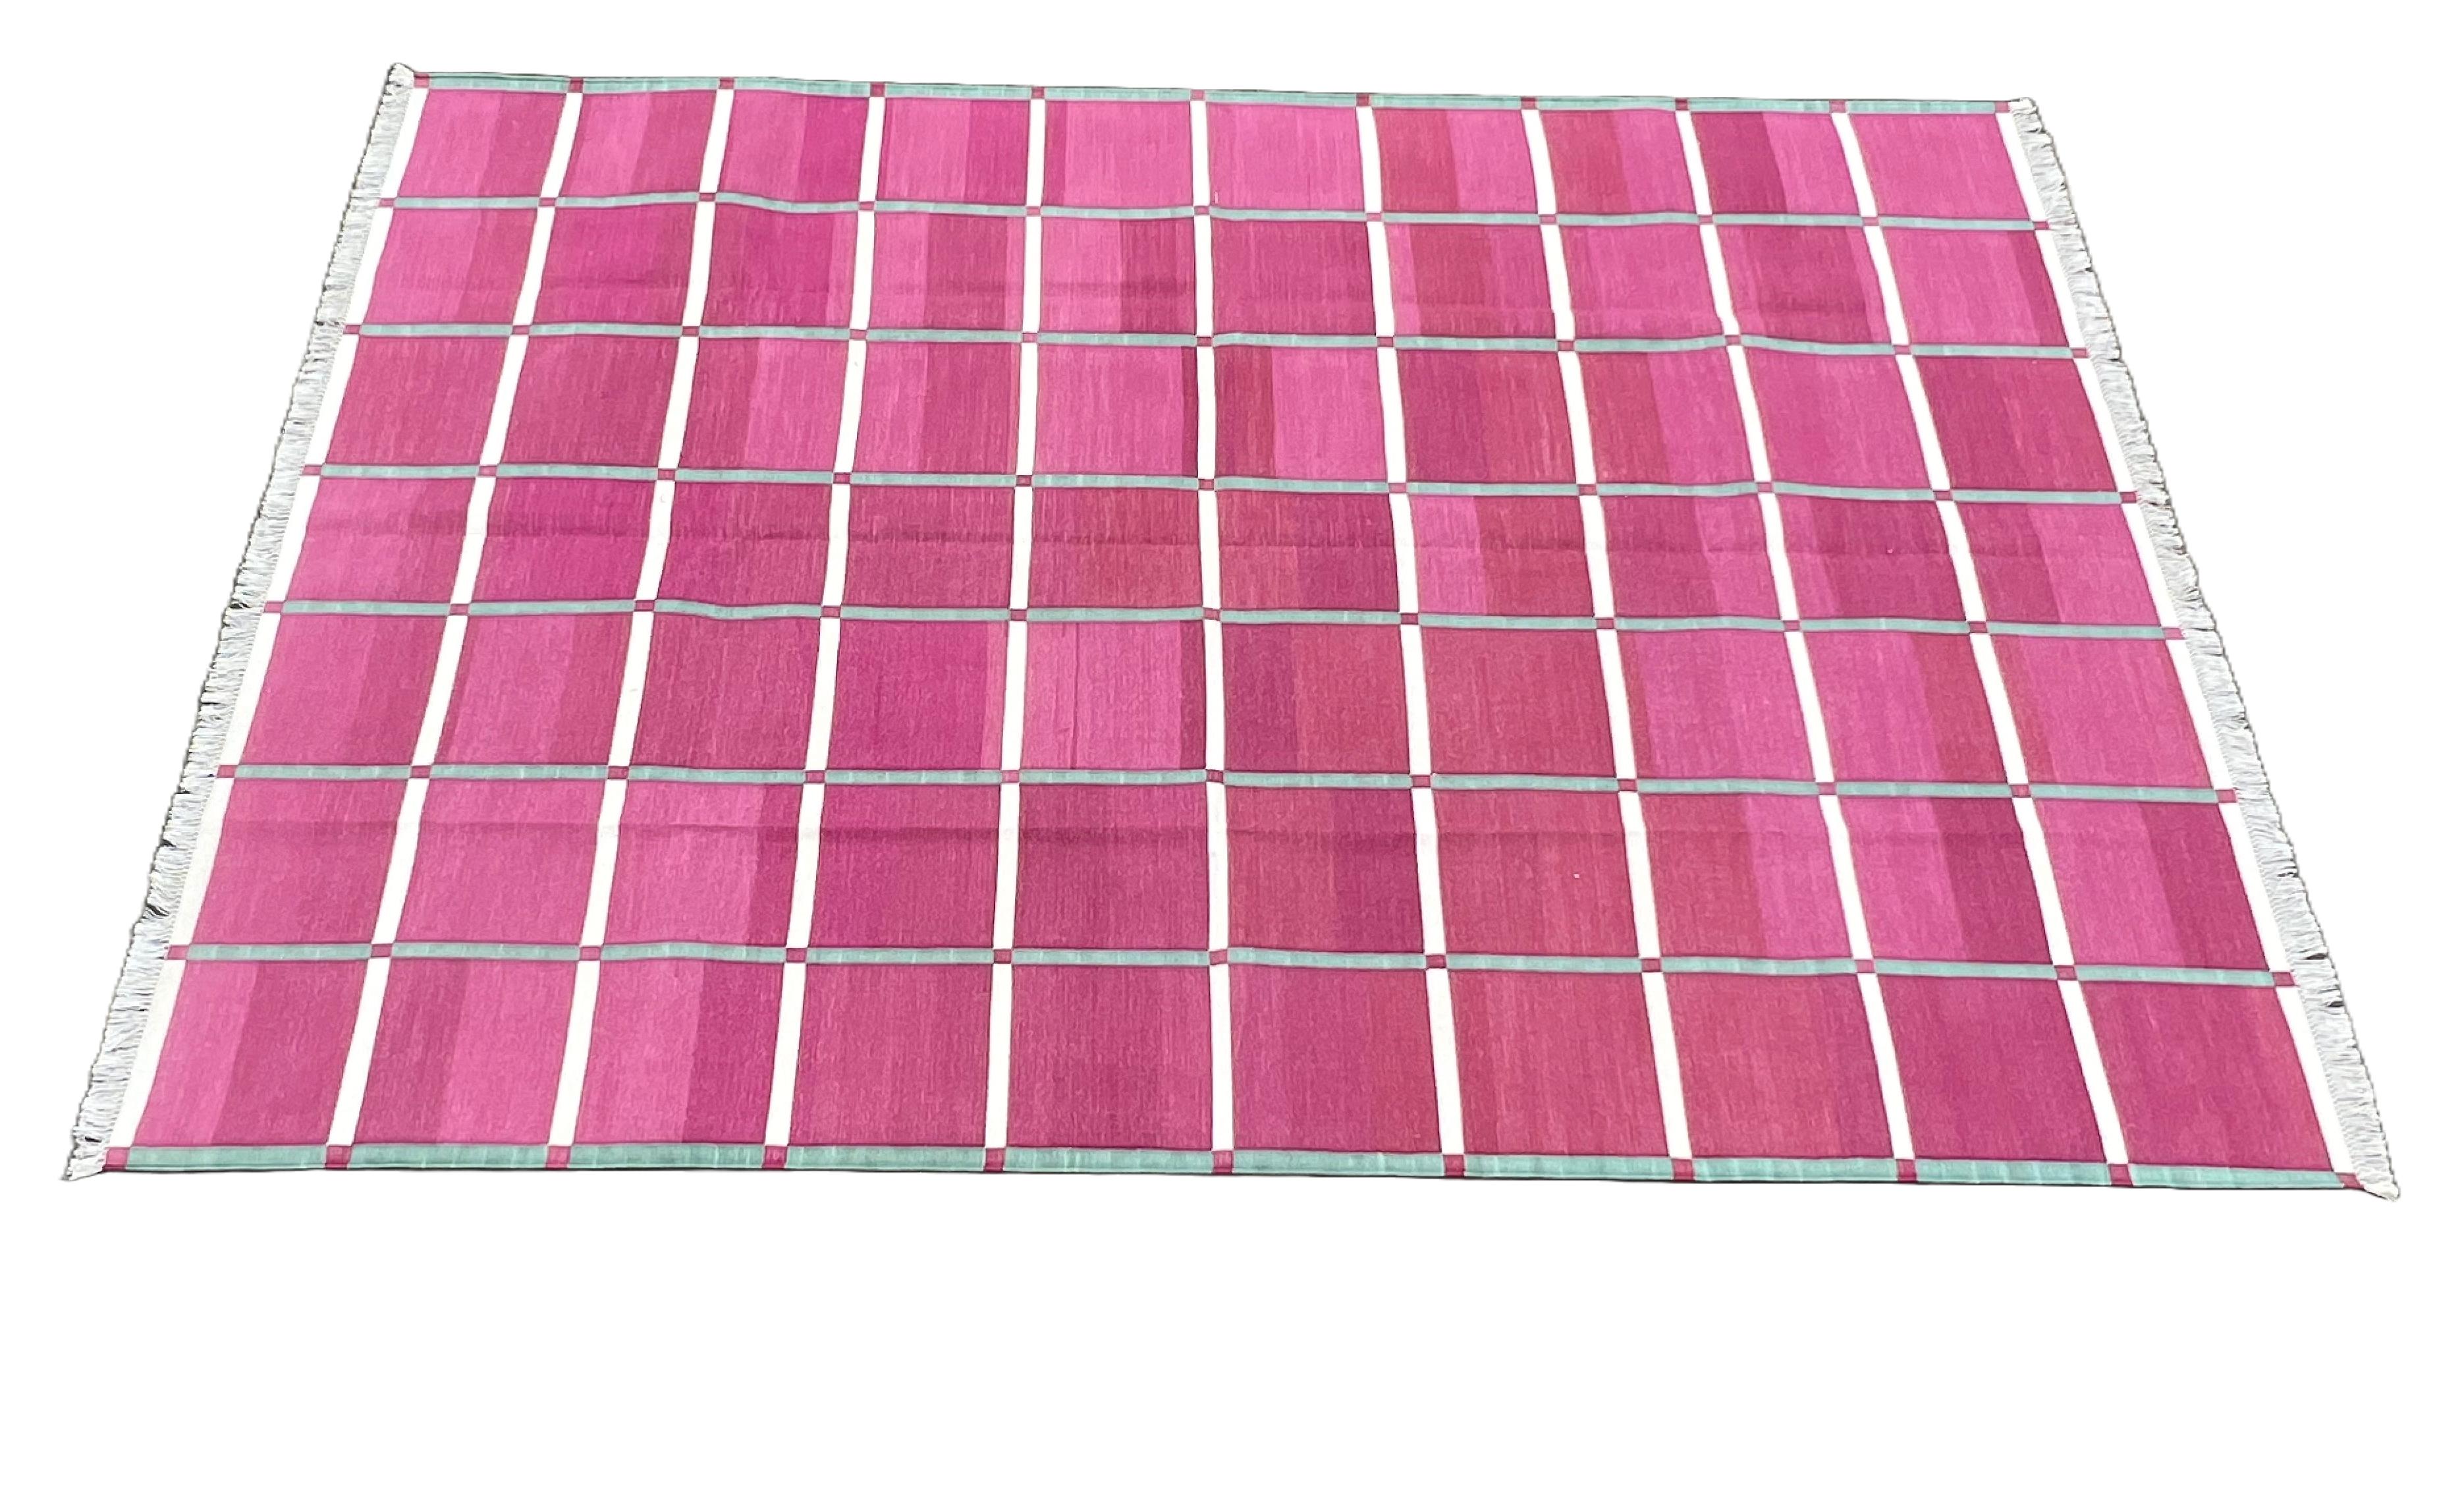 Hand-Woven Handmade Cotton Area Flat Weave Rug, Pink, Green Windowpane Check Indian Dhurrie For Sale